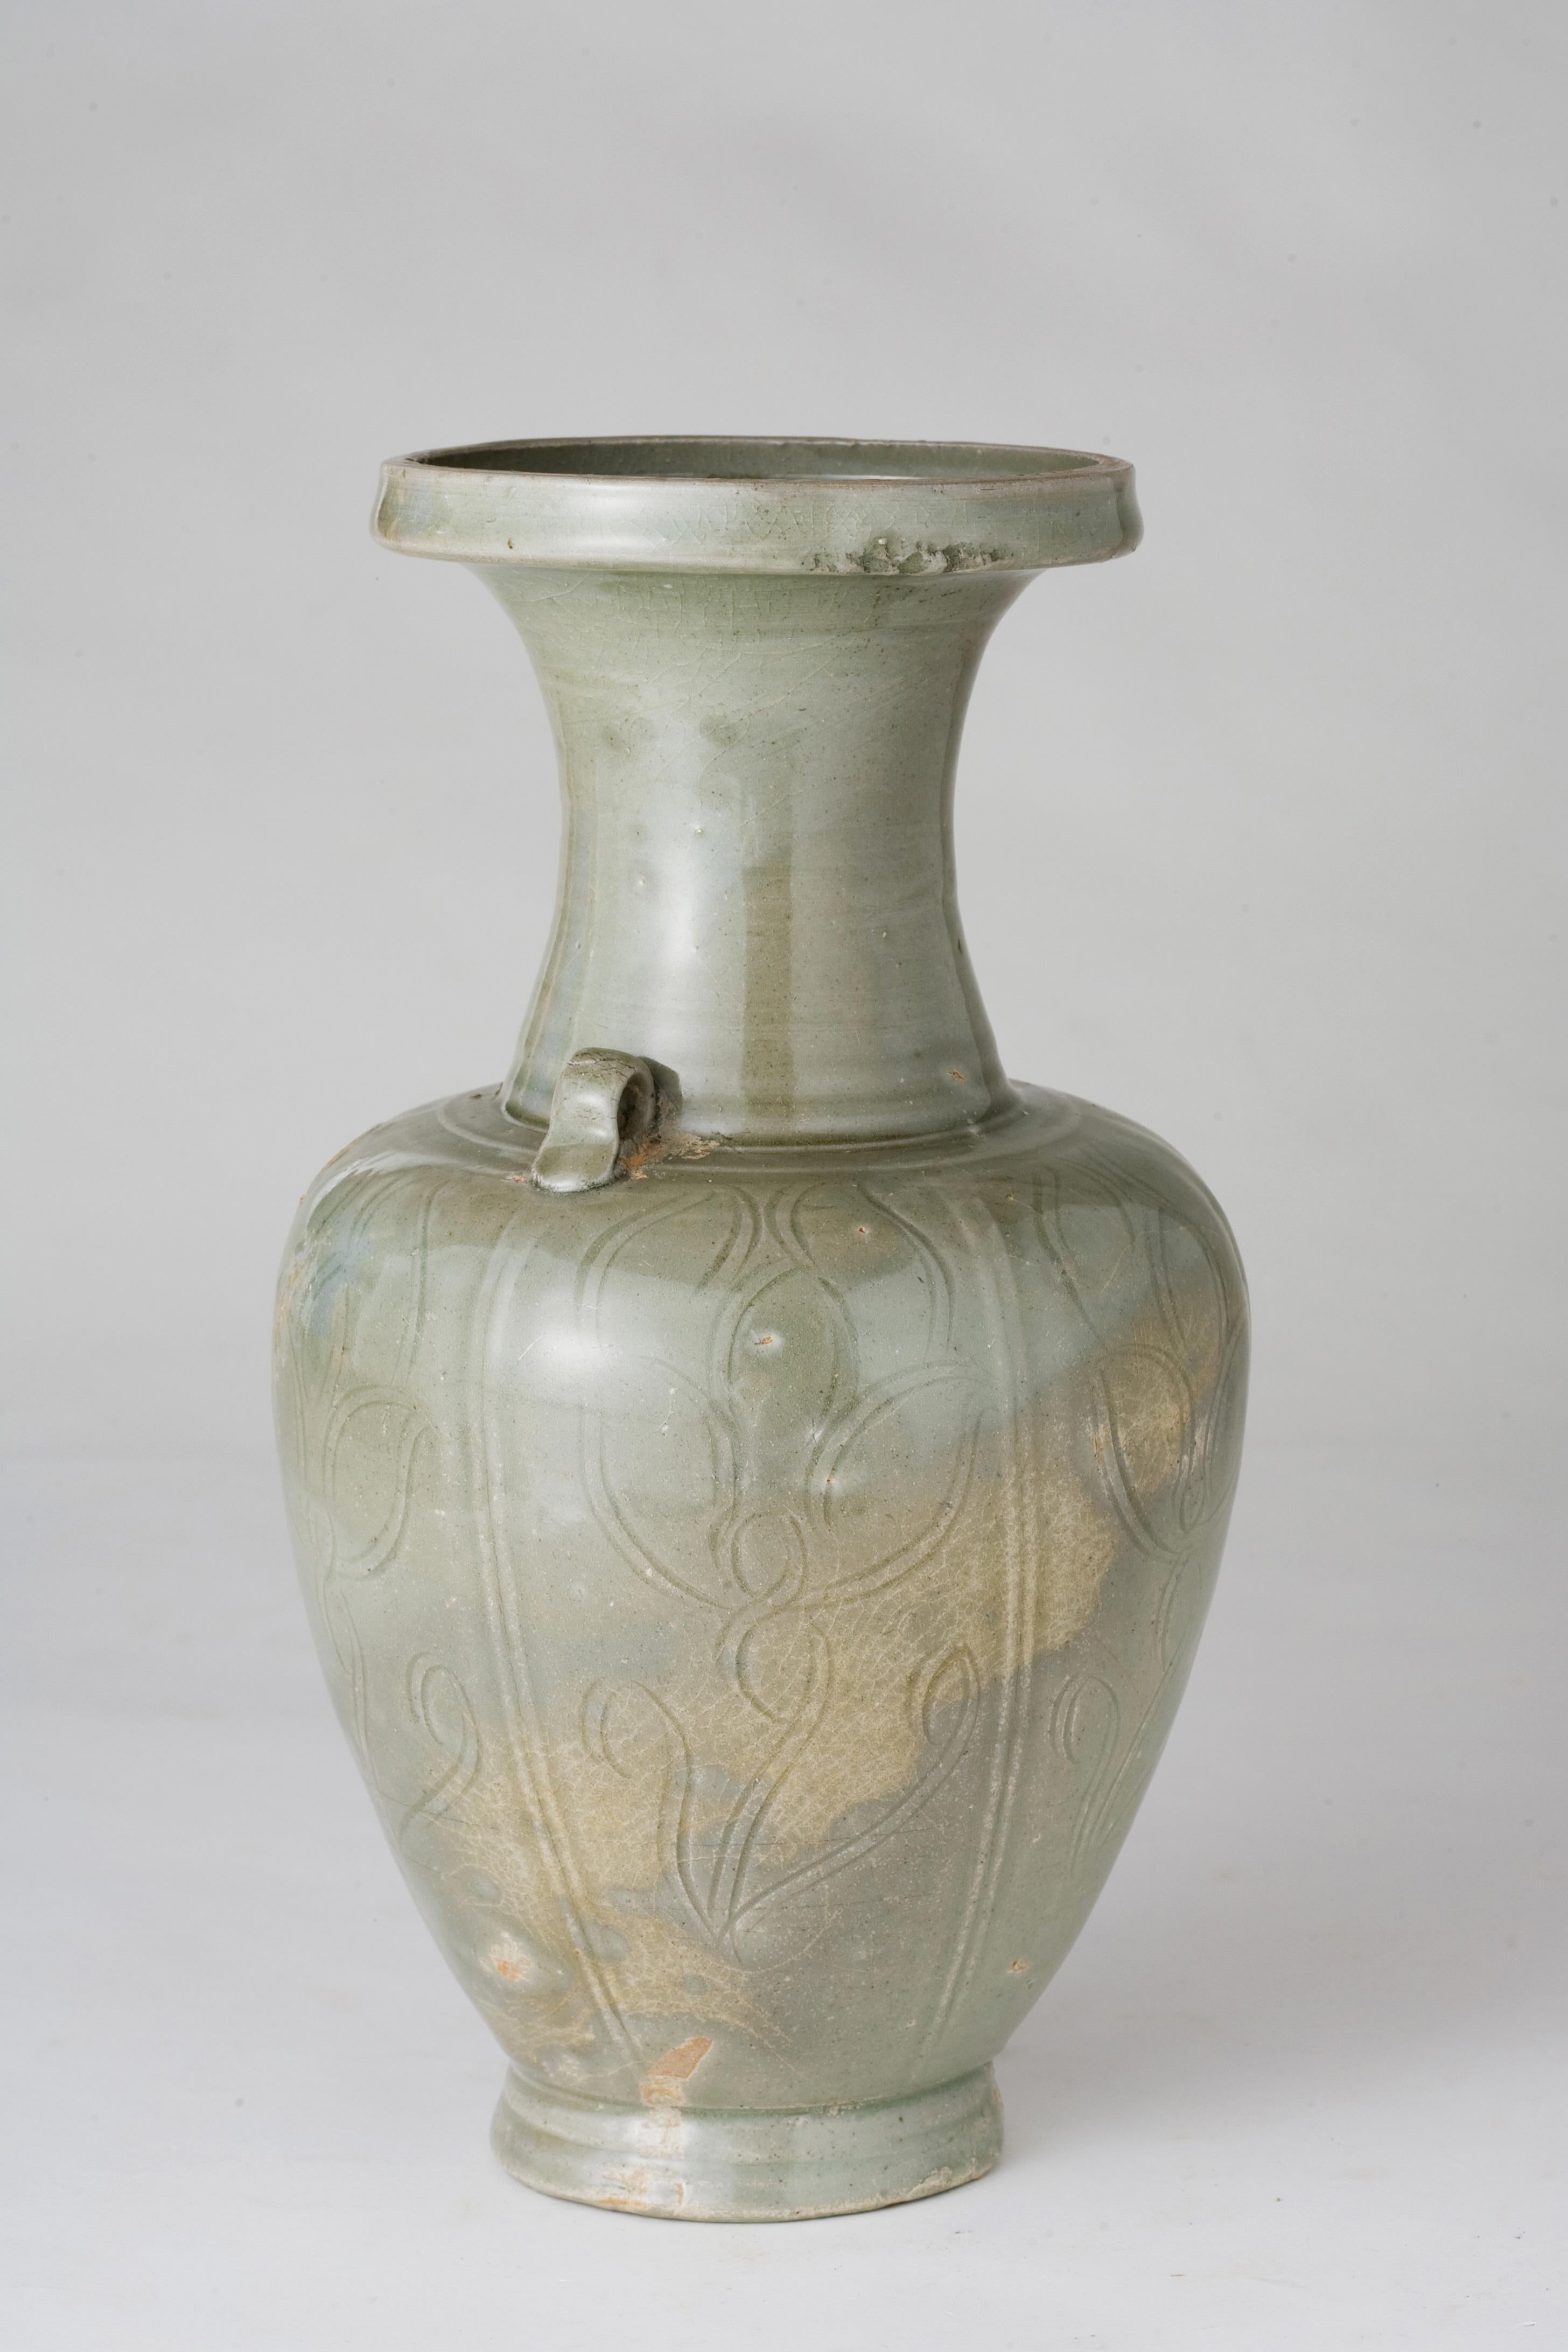 The form of Longquan celadon vases from the Northern Song dynasty evolved from an early design with a long neck and tapering body to a later ovoid body with a shorter neck. Over time, the glaze developed a more olive tone, and the carved decorations